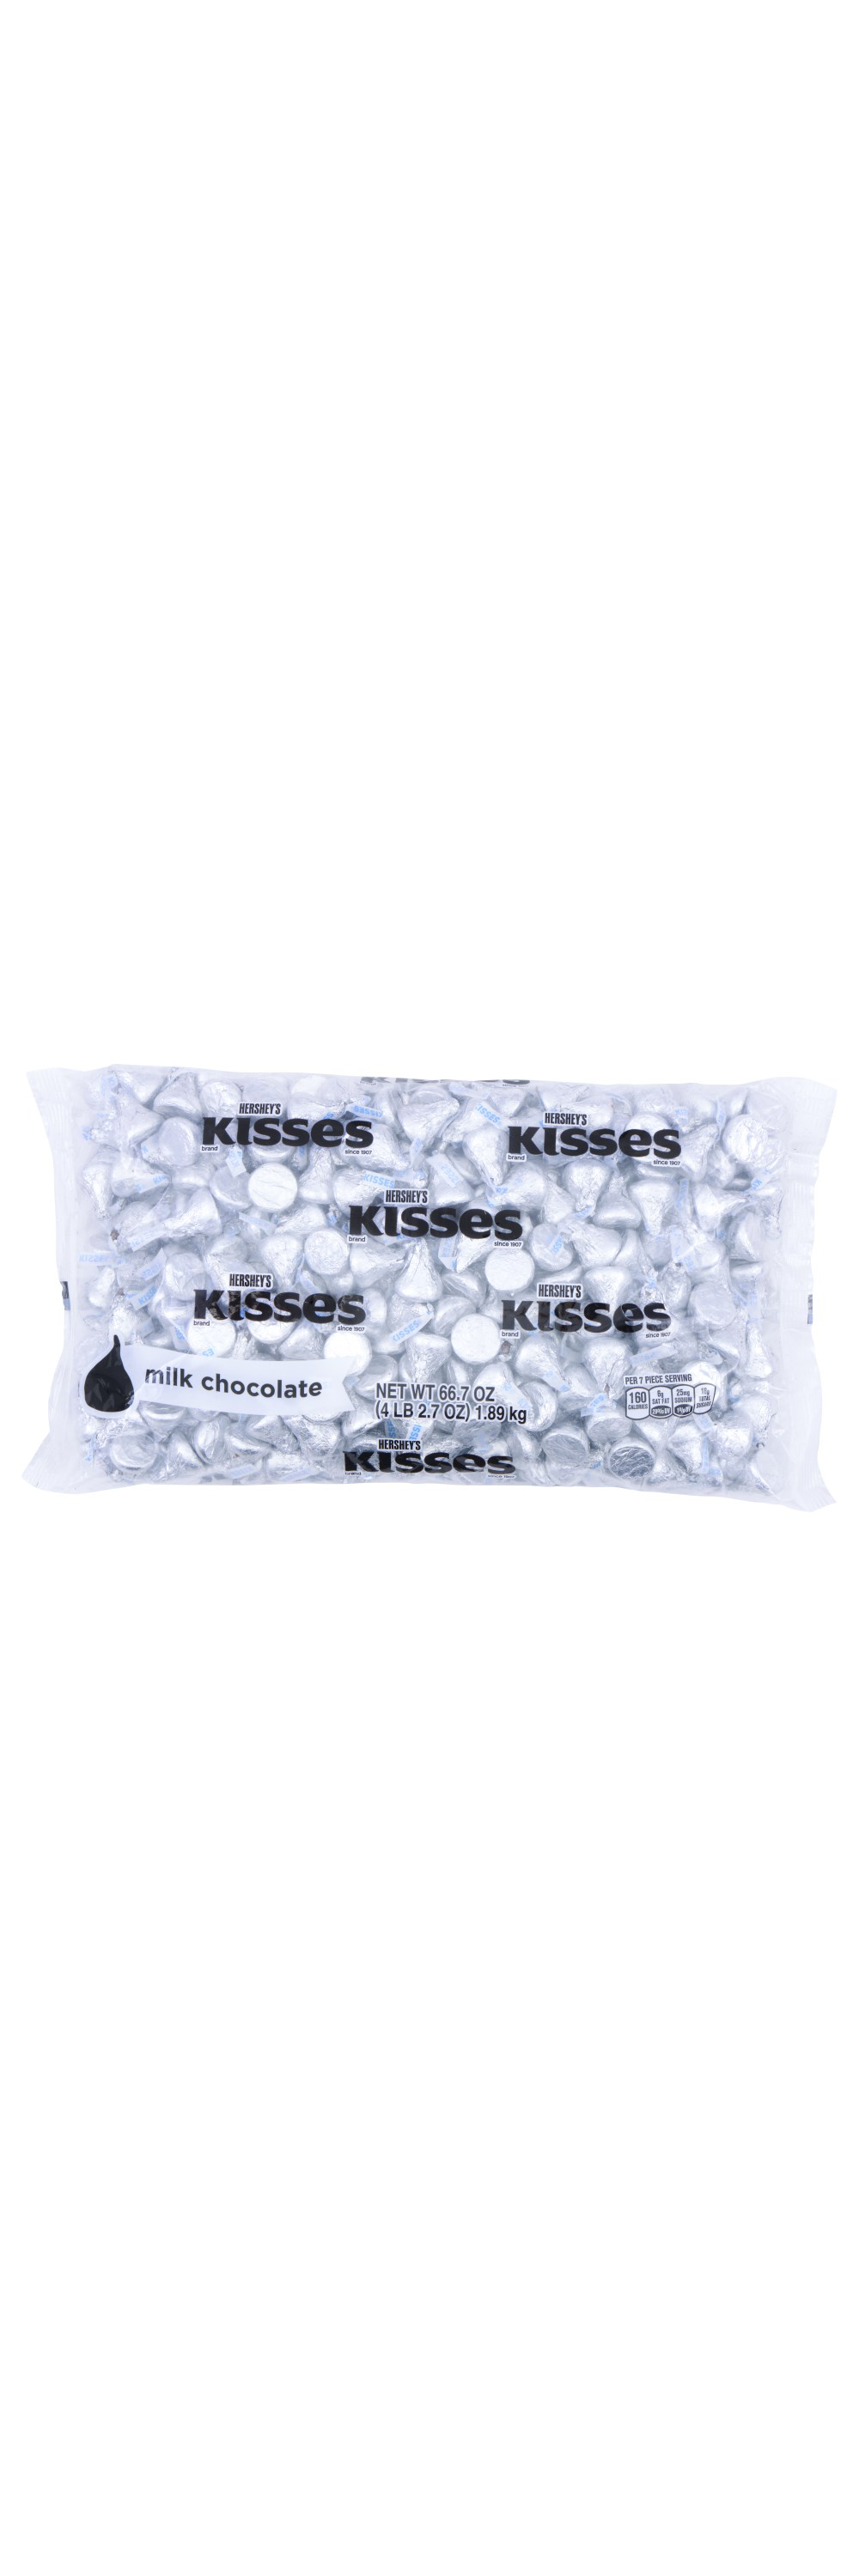 HERSHEY'S KISSES Silver Foil Milk Chocolate Candy, 66.7 oz bag - Front of Package